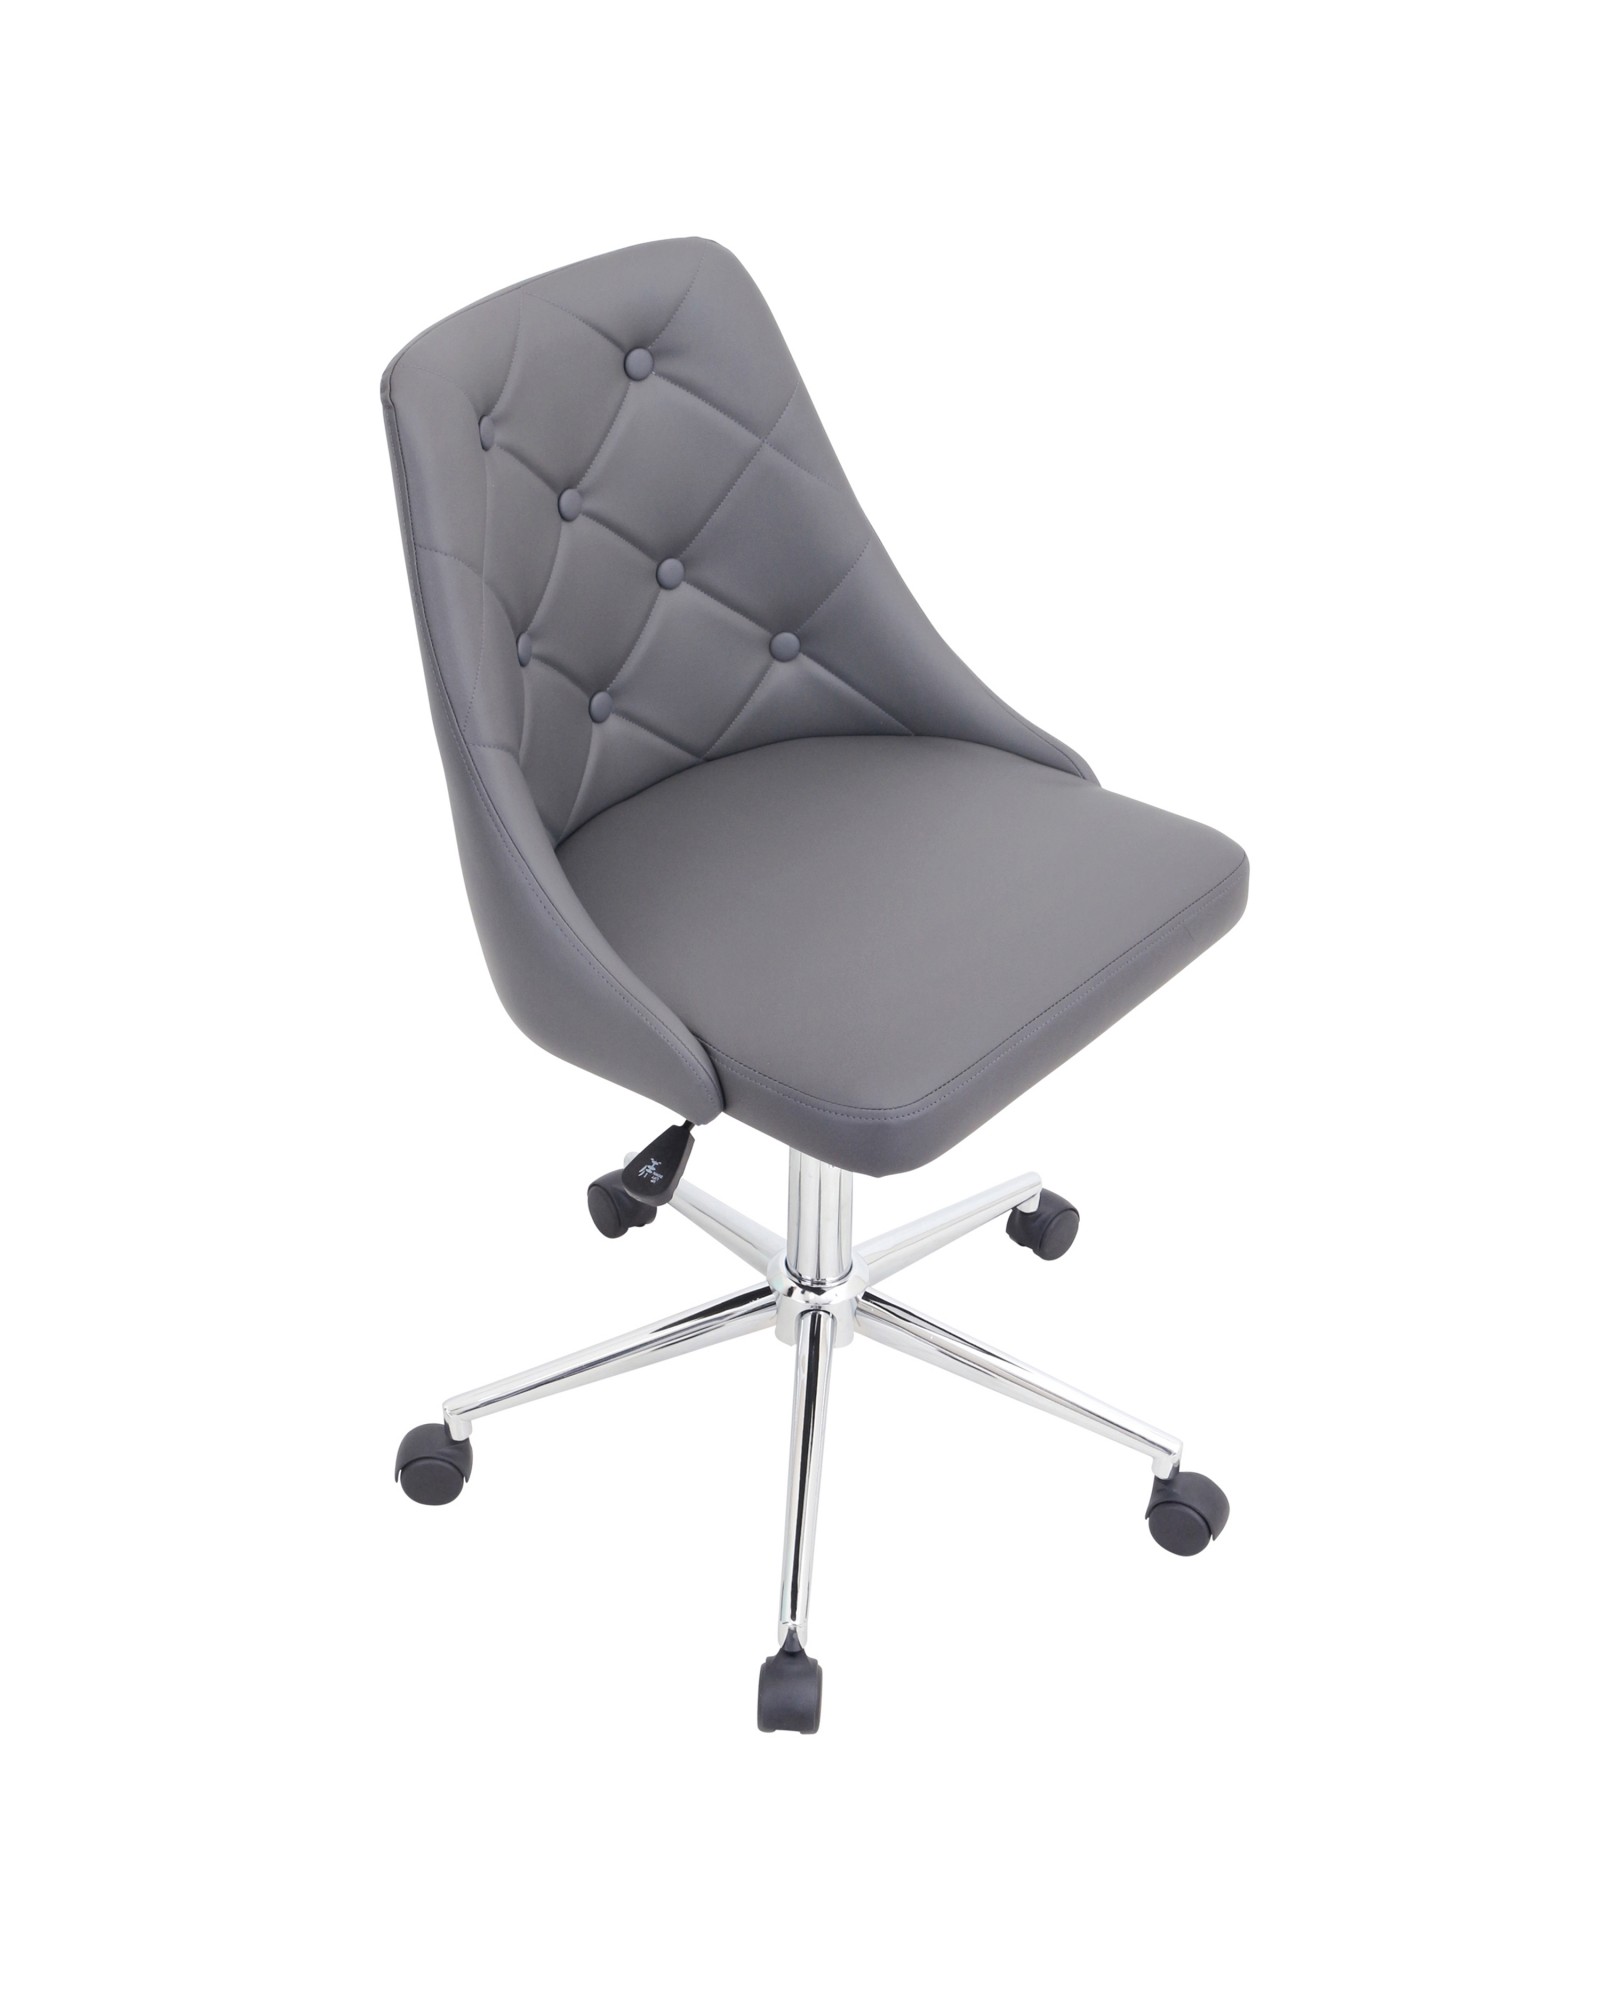 Marche Contemporary Adjustable Office Chair with Swivel in Grey Faux Leather